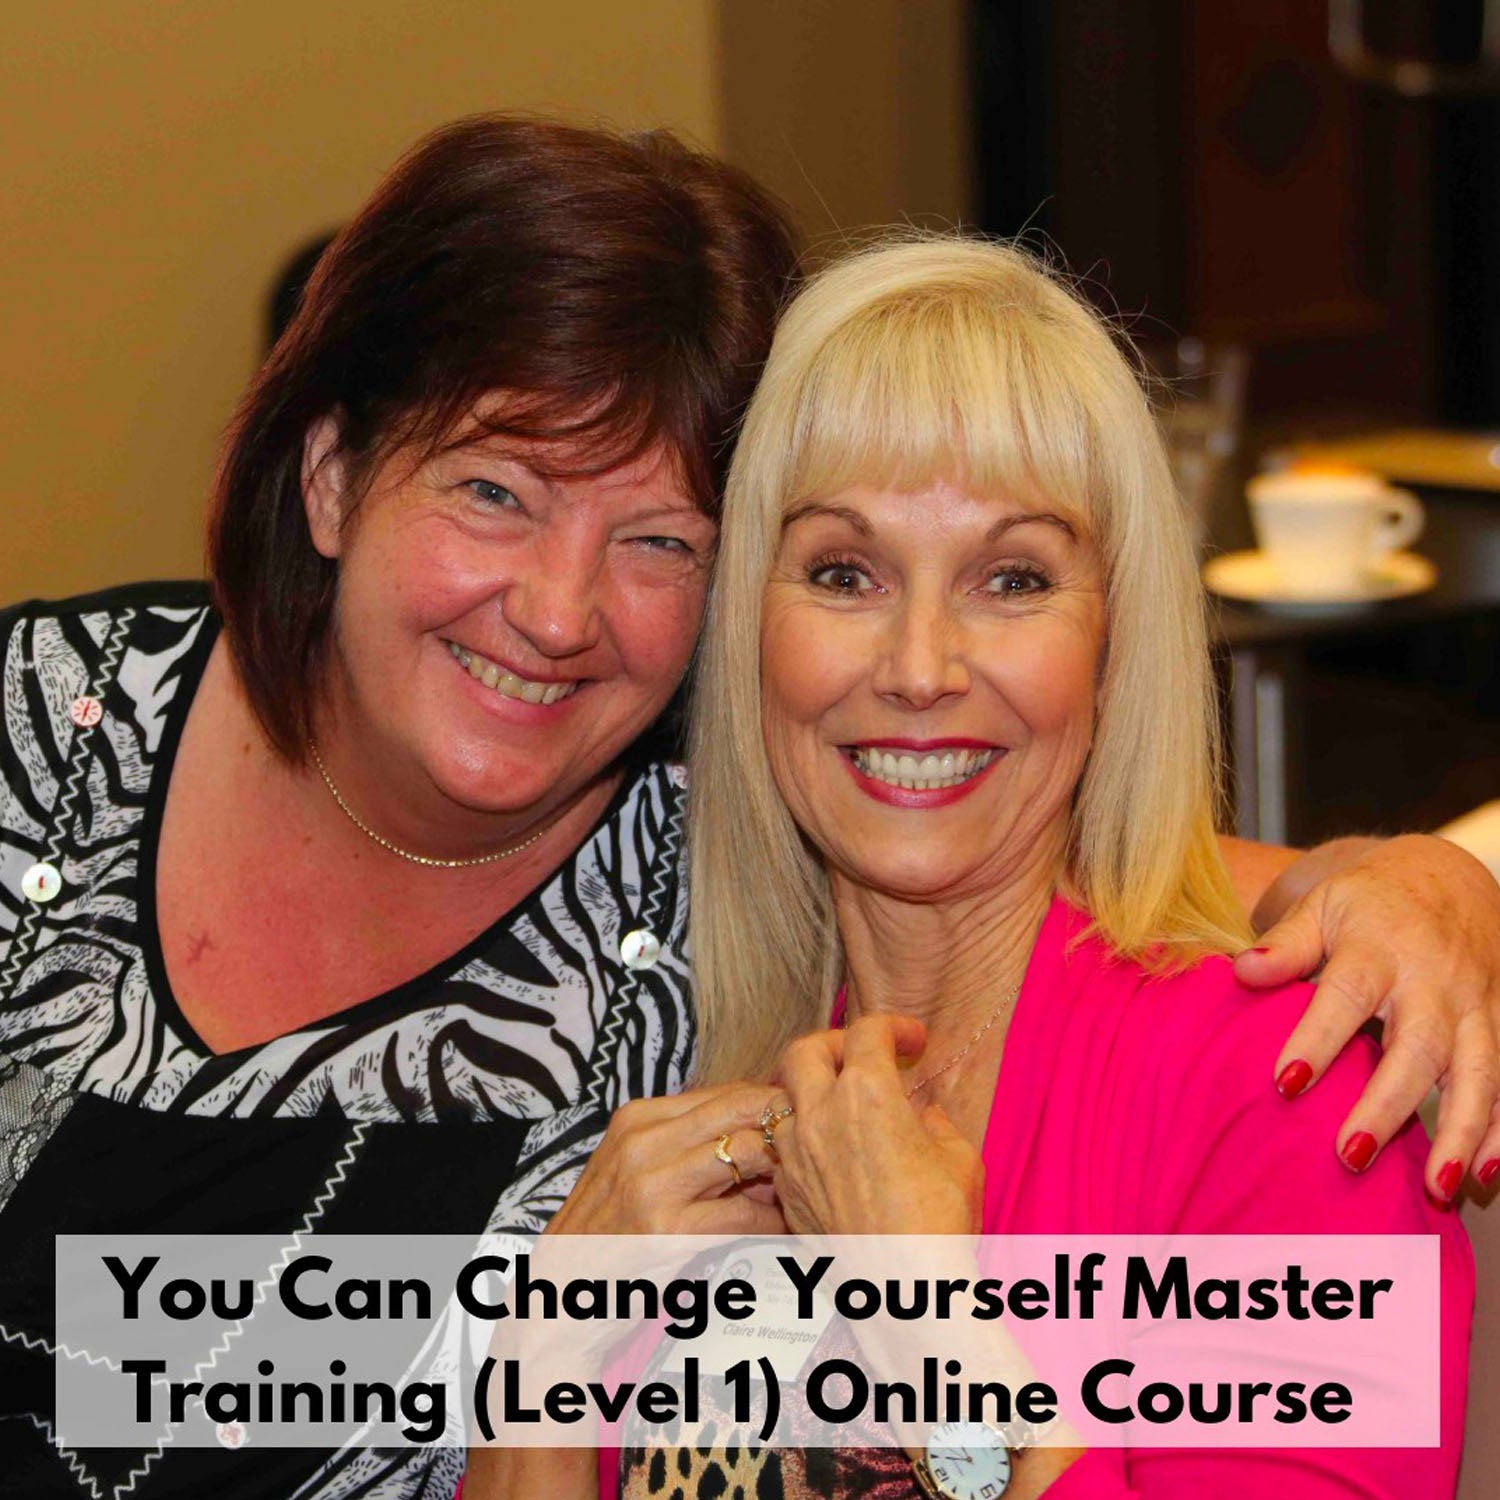 "You Can Change Yourself Master Training" (Level 1) ONLINE Course, skillstochange.com